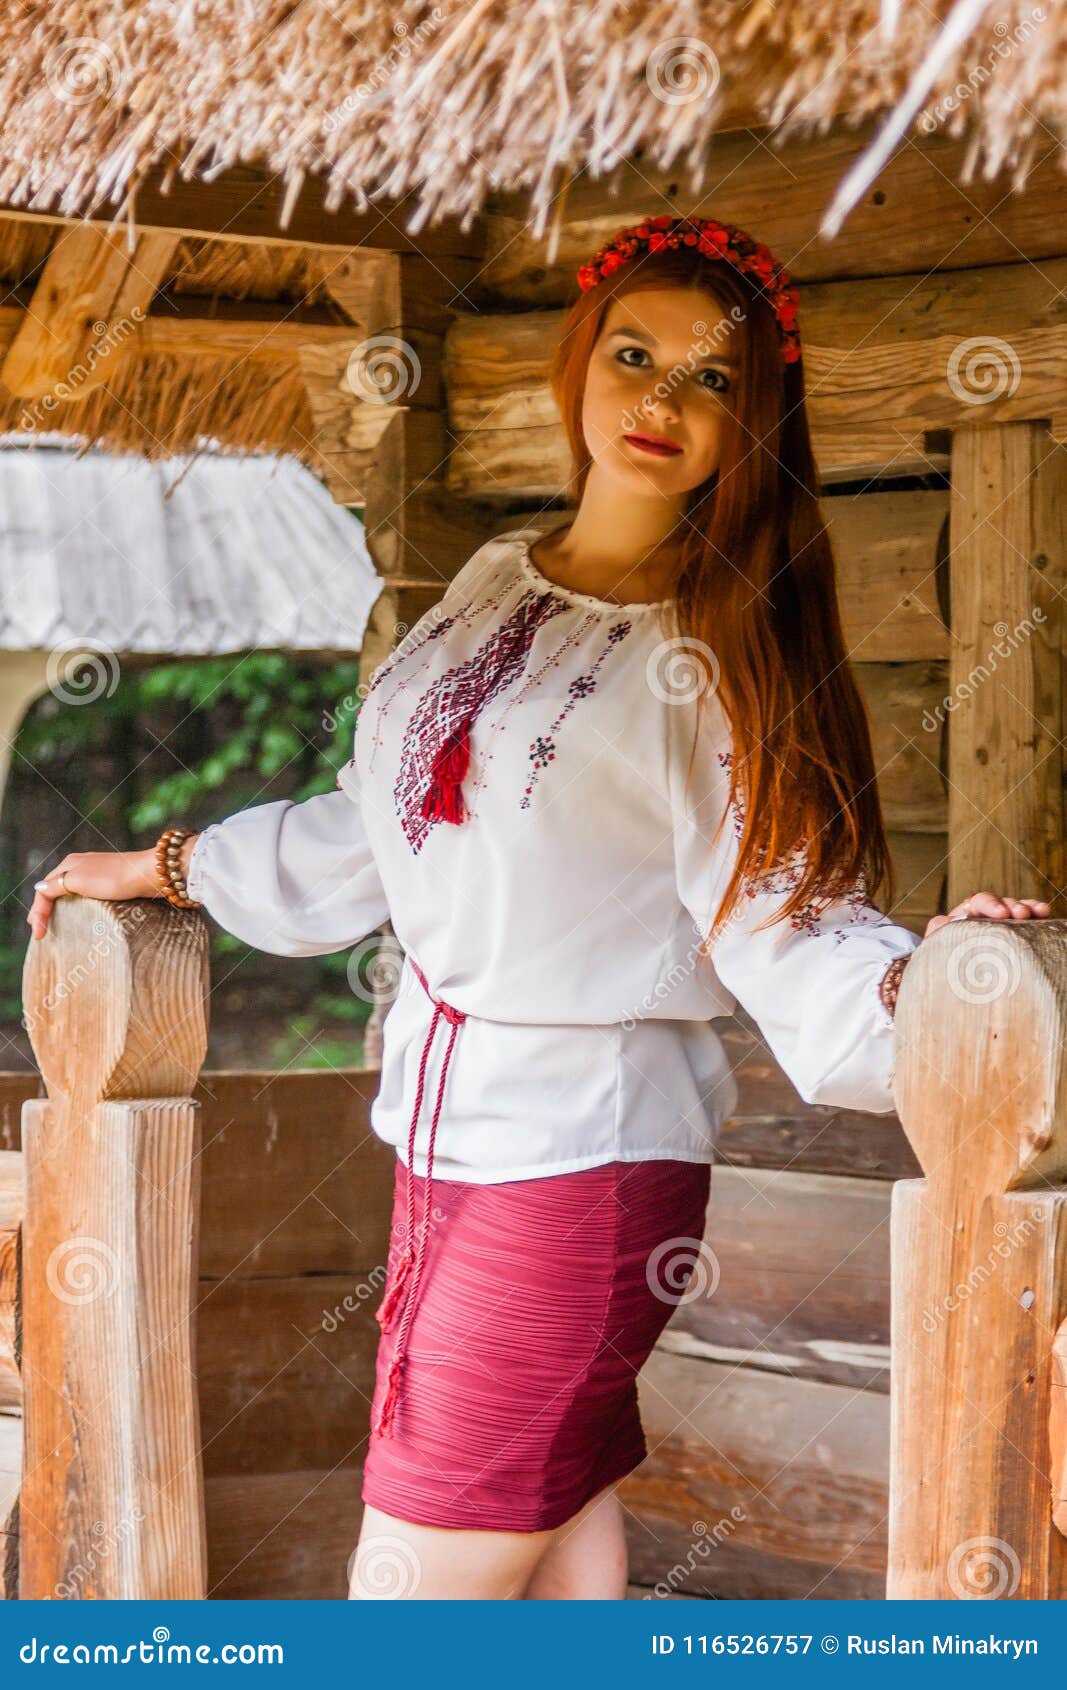 Beautiful Girl in Ukrainian Embroidered and Red Skirt Stock Image ...